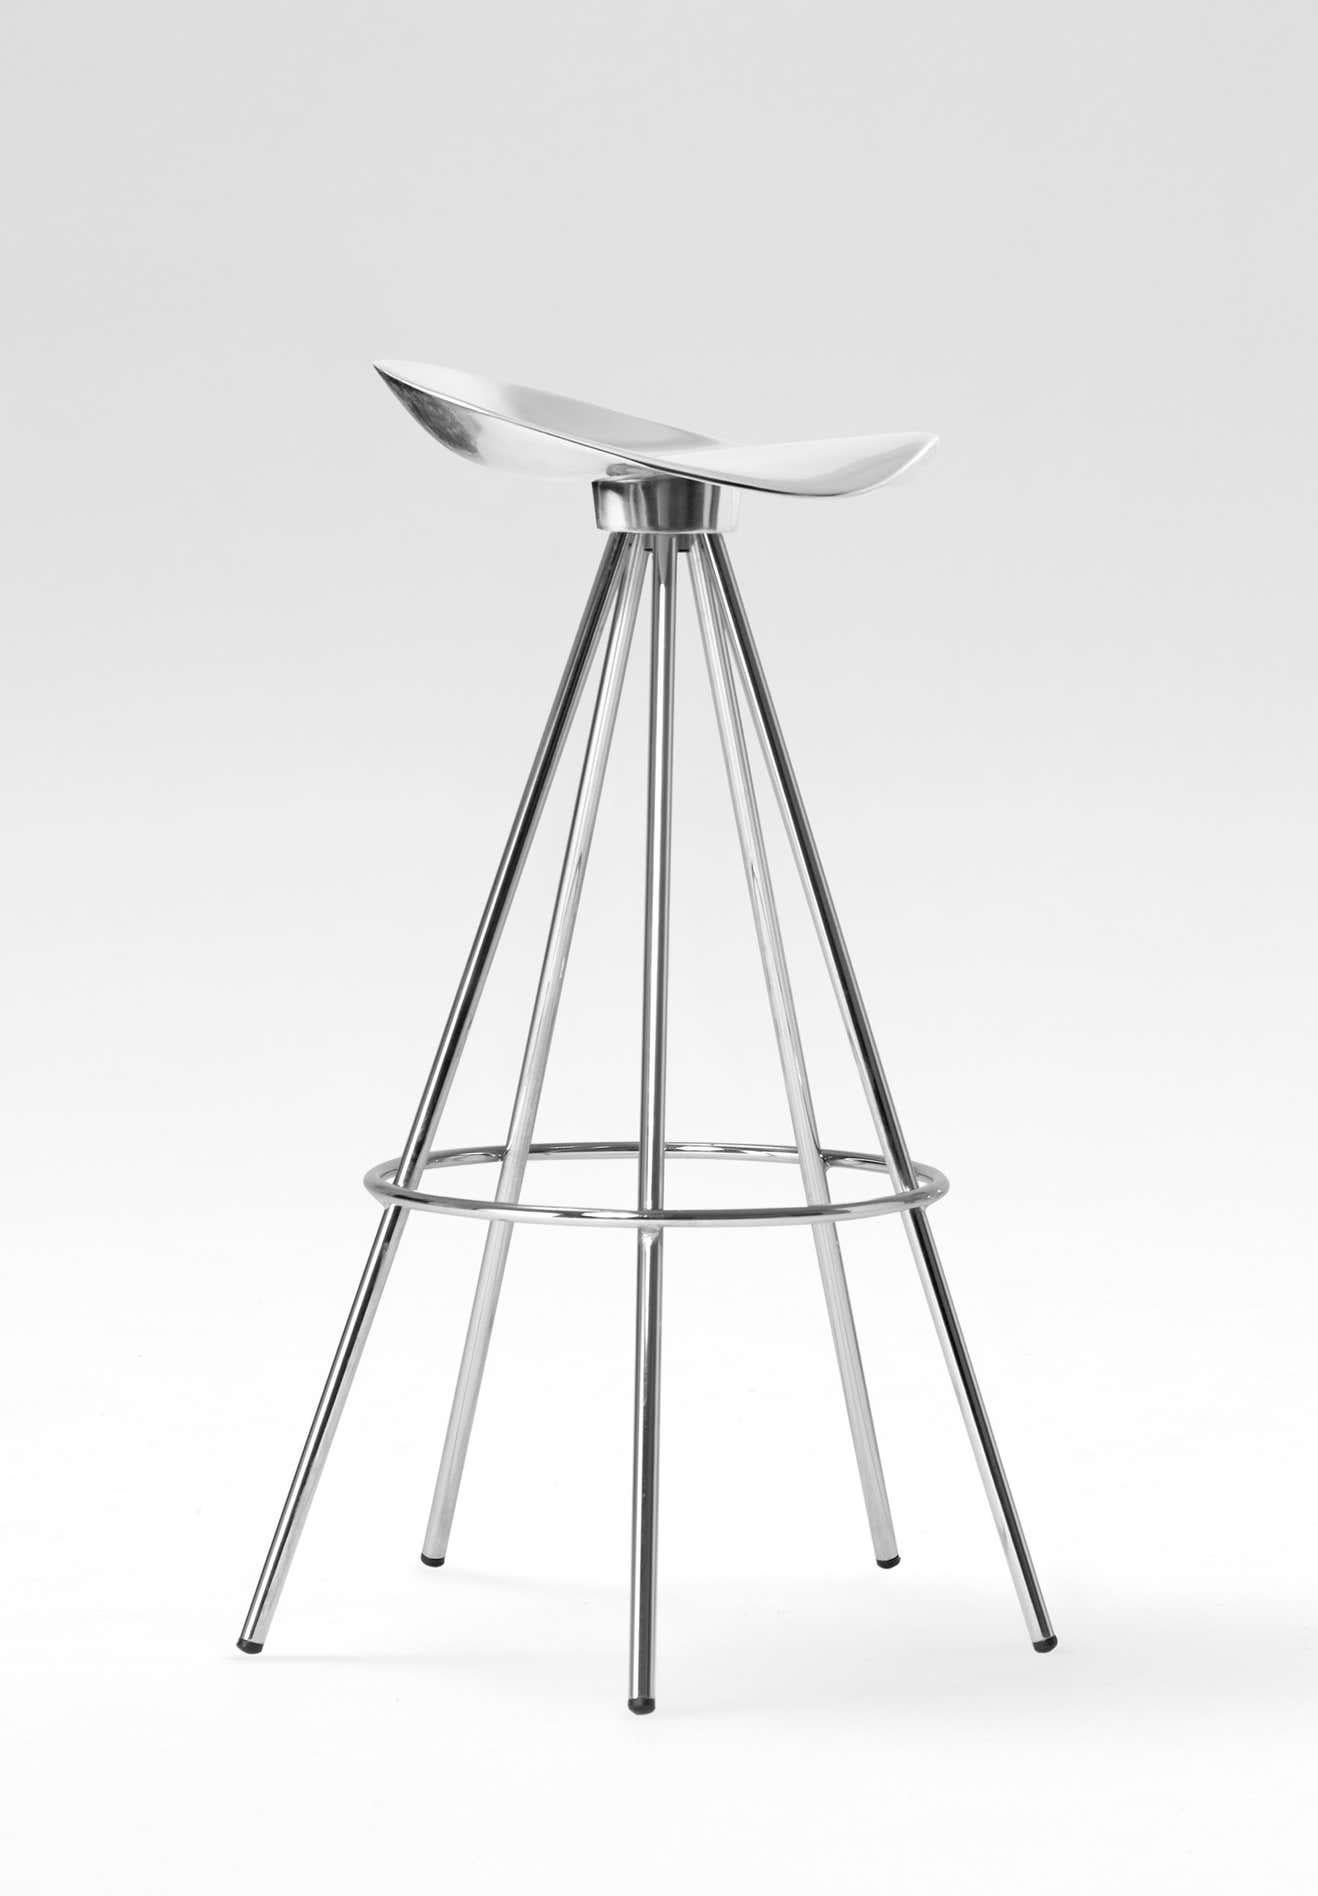 Set of 4 high jamaica bar stool aluminium seat and chromed steel by Pepe Cortés.

Materials: 
Aluminium

Dimensions: 
D 51 cm x W 48 cm x H 81 cm (SH 77 cm)

The Jamaica Stool is already a classic in Spanish design and is one of the best